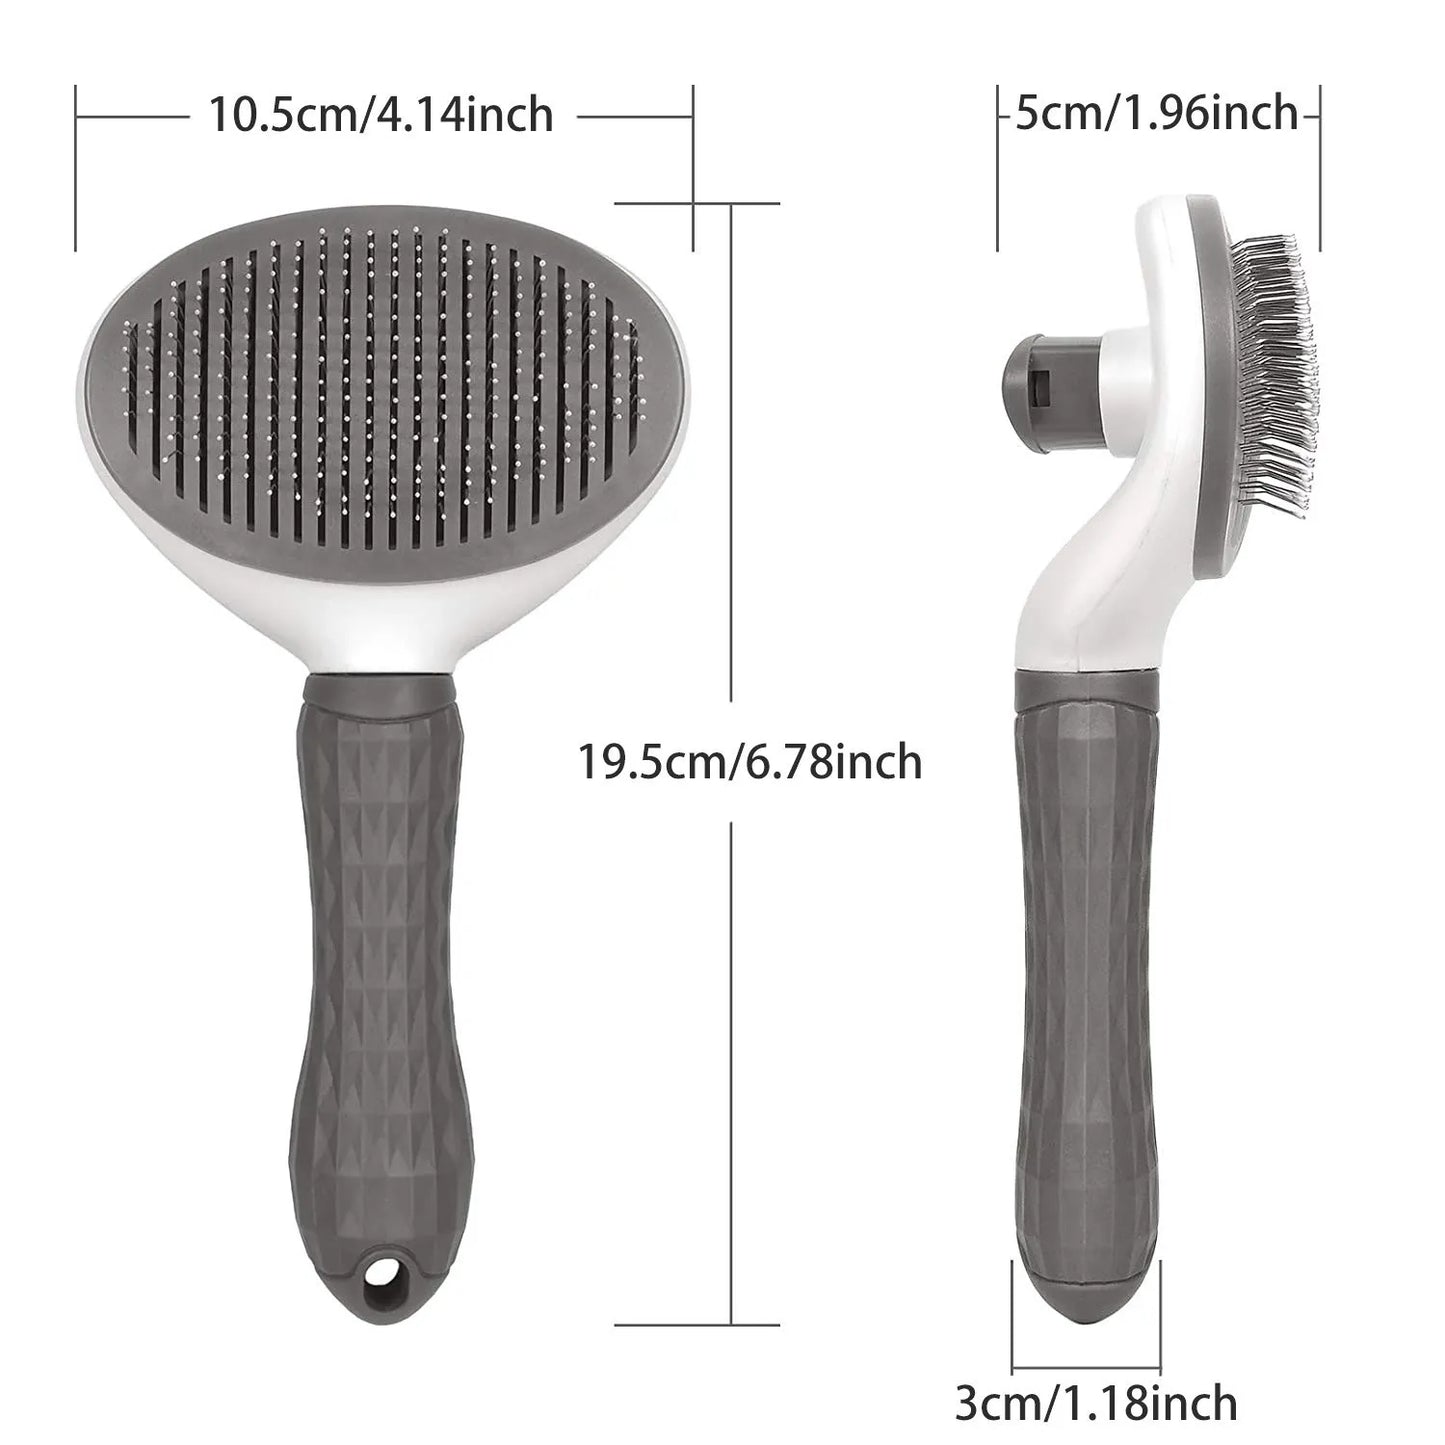 Self-Cleaning Pet Hair Remover Brush Grooming Essential for Dogs